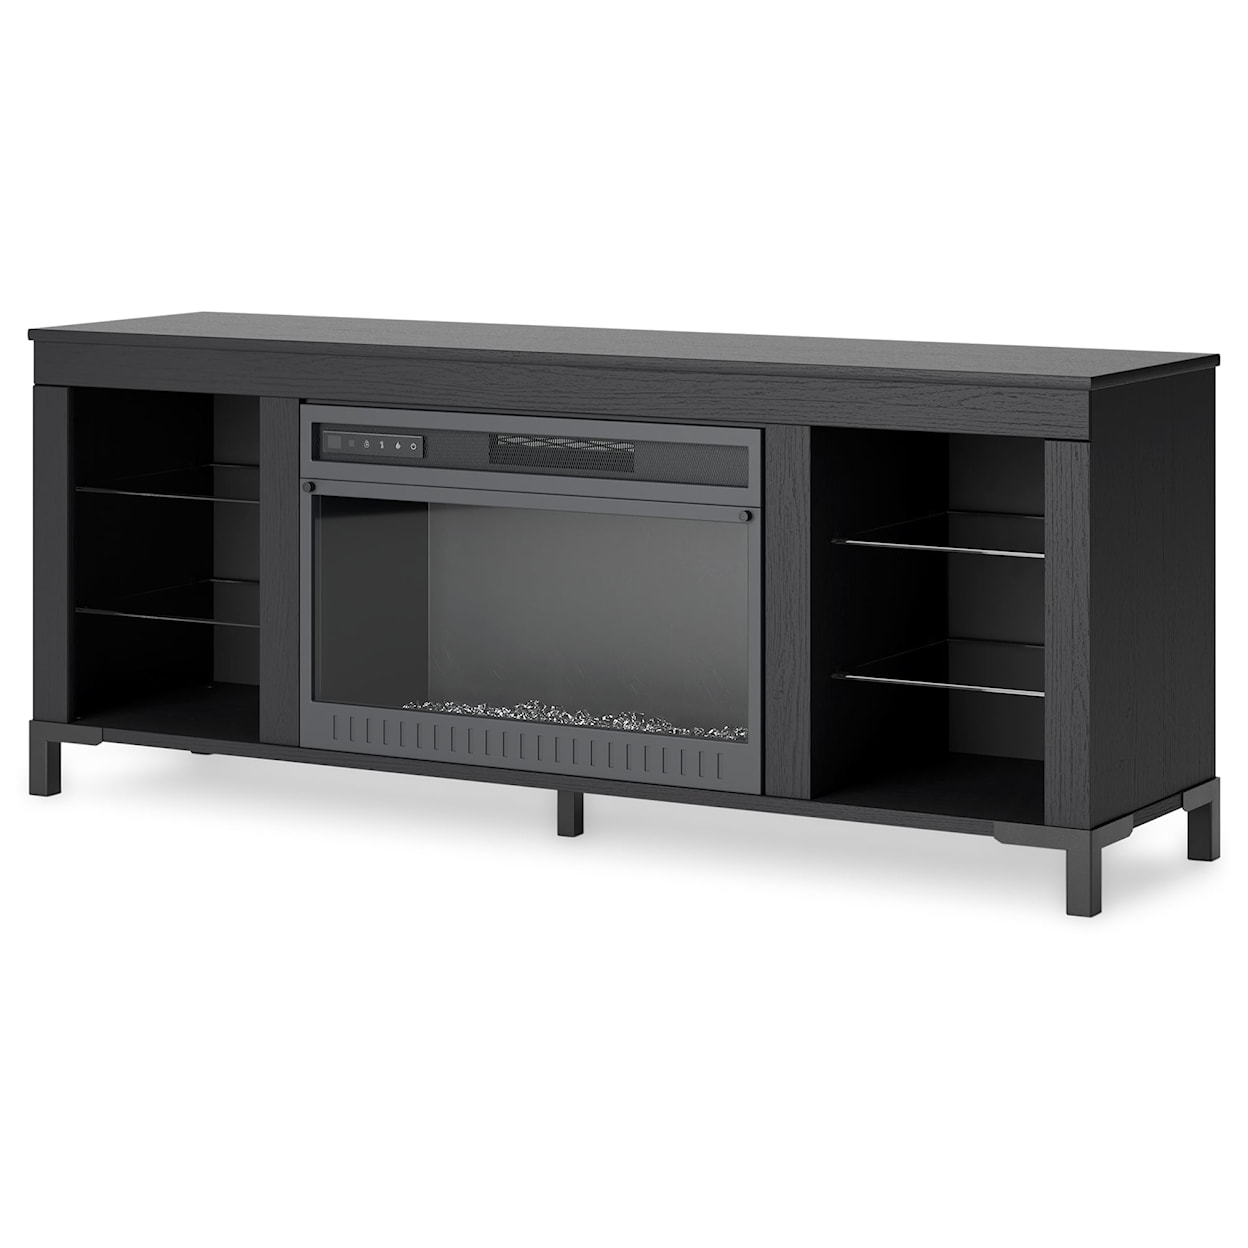 Michael Alan Select Cayberry 60" TV Stand With Electric Fireplace